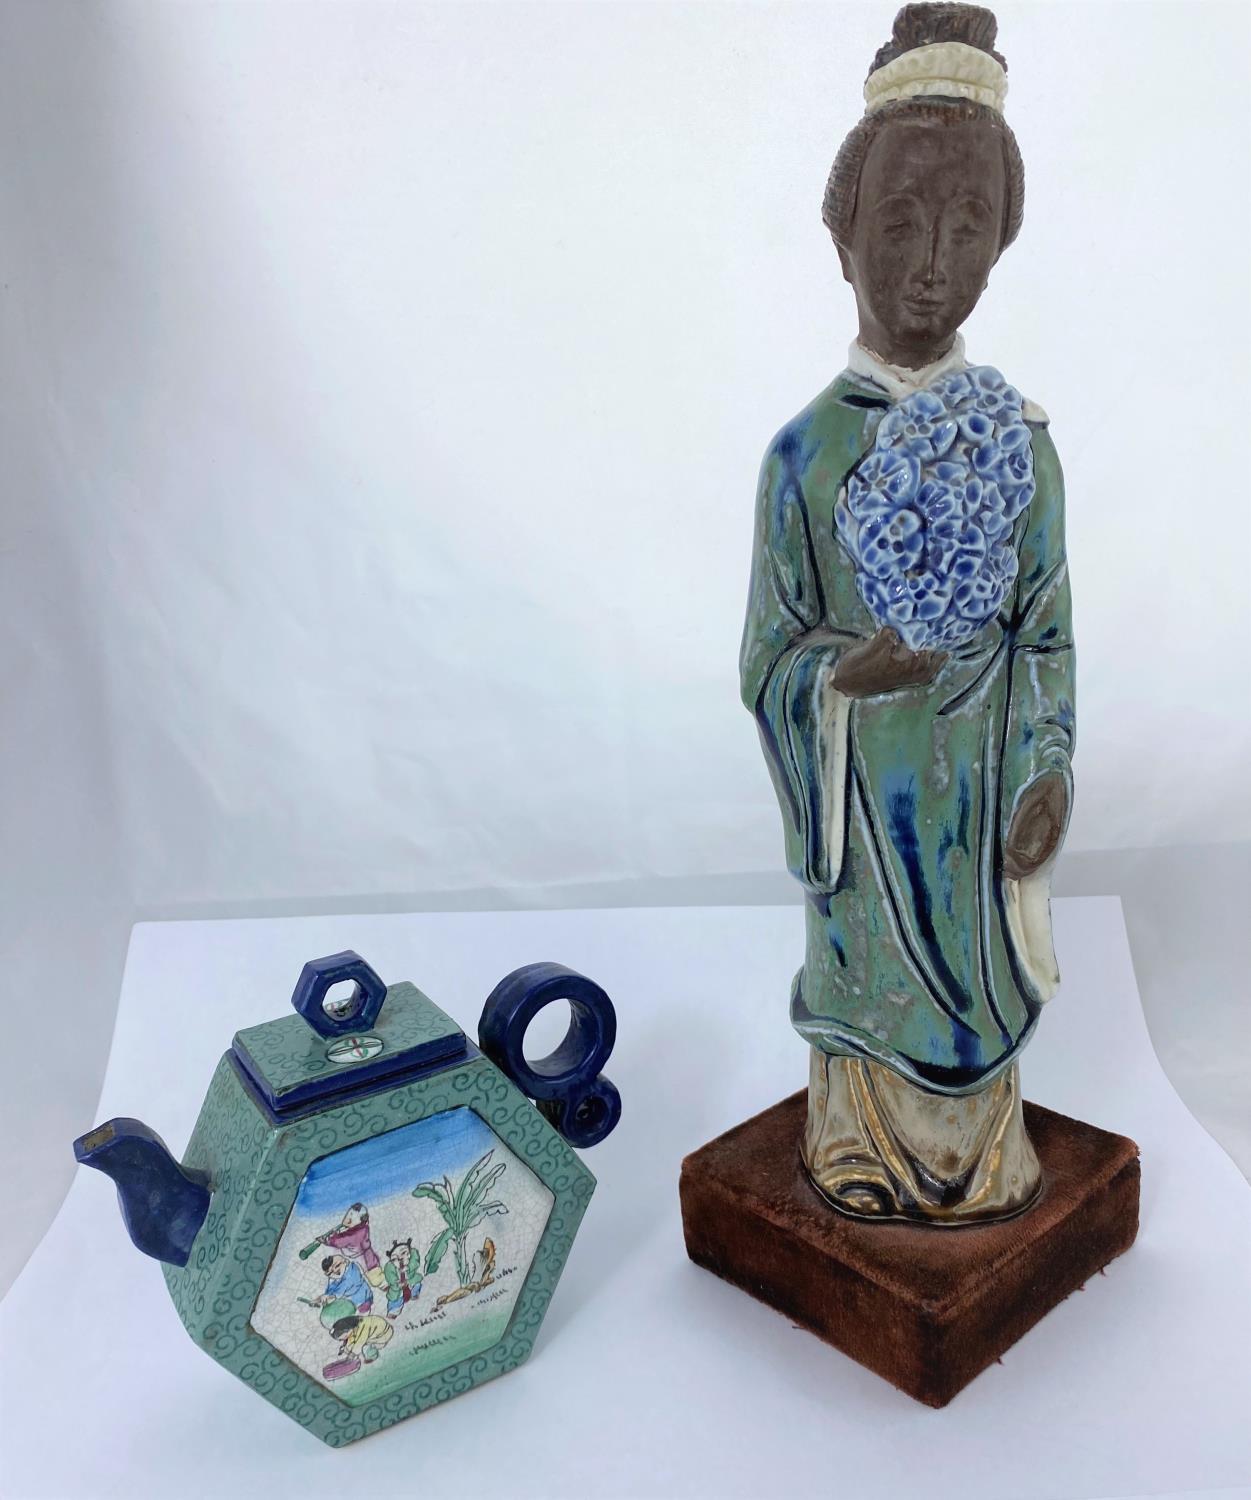 A Chinese ceramic figure of woman in robed and flowers, mounted on velvet stand, height 35cm and